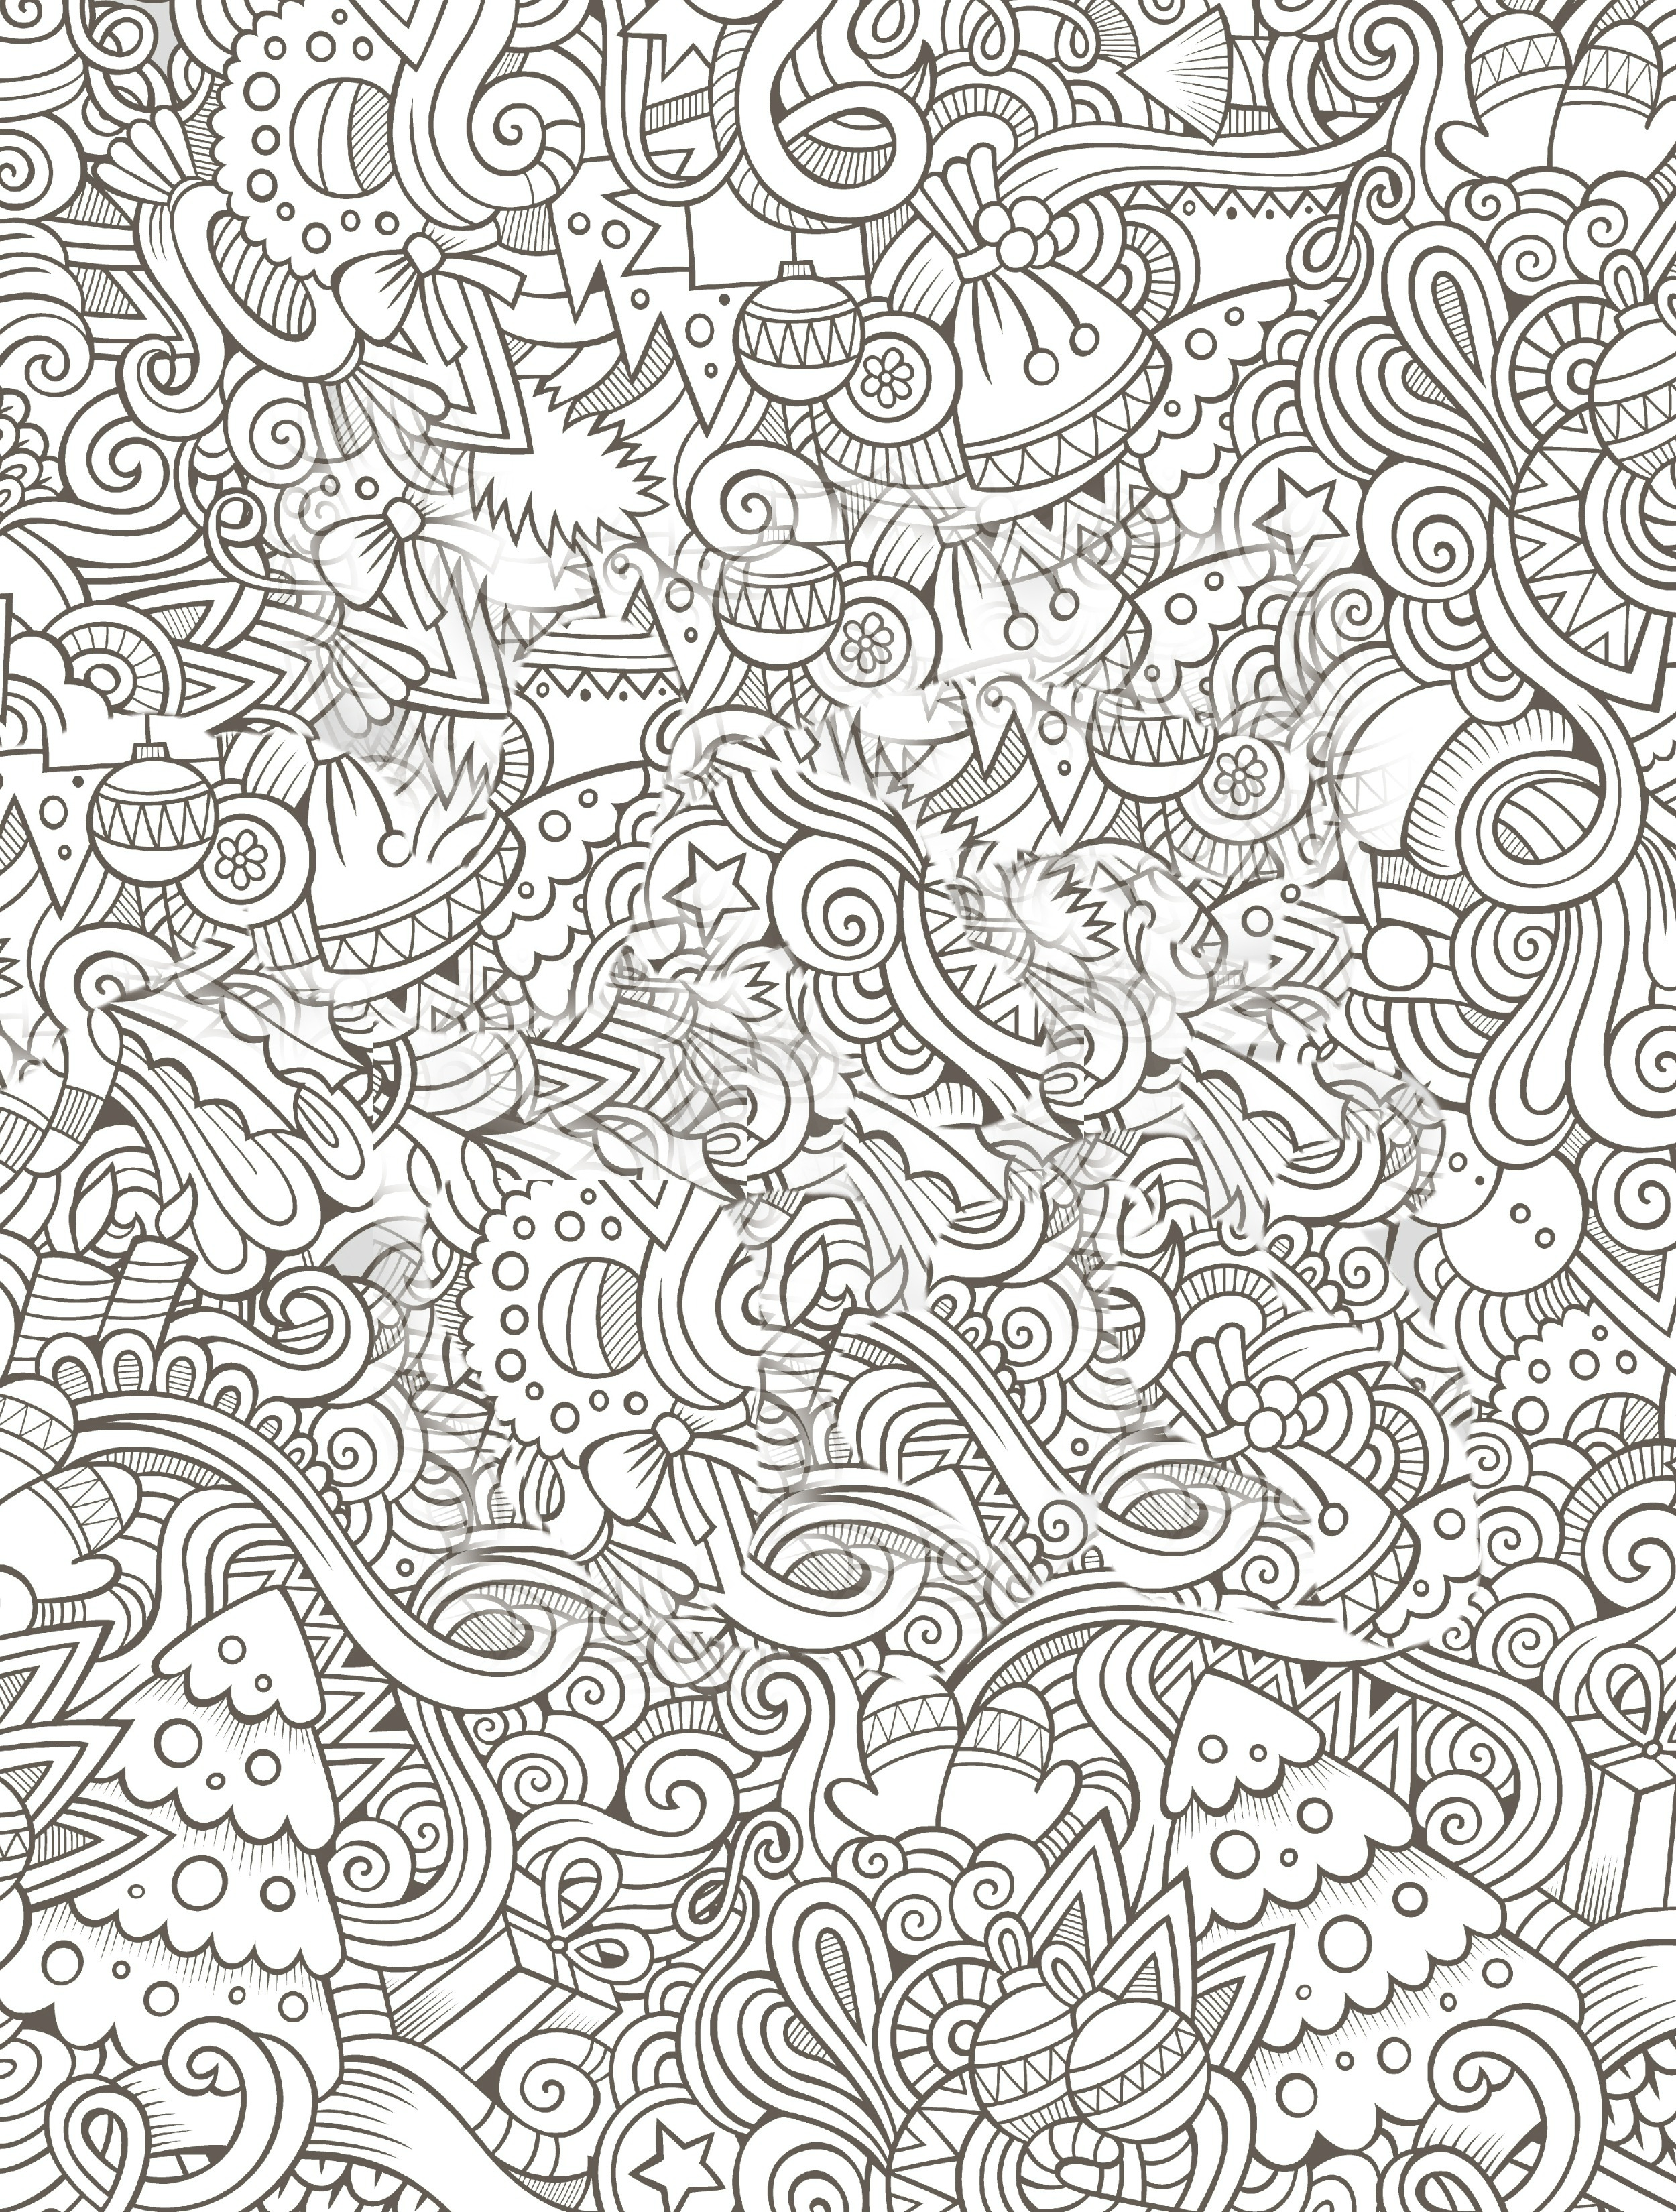 Coloring Pages : Free Printable Holiday Adult Coloring Pages Books - Free Printable Coloring Pages For Adults